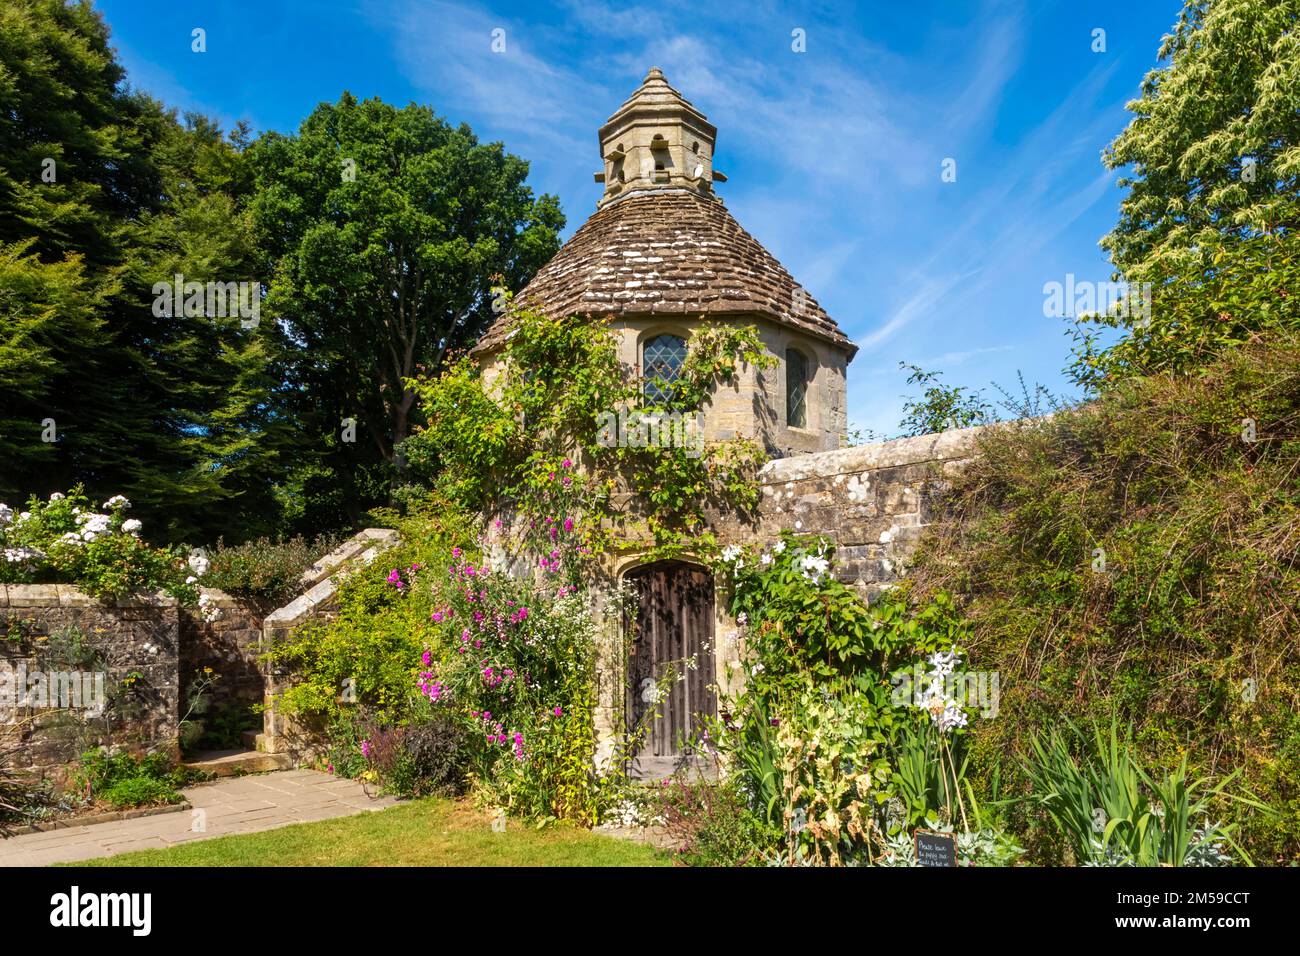 England, West Sussex, Haywards Heath, Handcross, Nymans House and Garden *** Local Caption ***  UK,United Kingdom,Great Britain,Britain,England,Englis Stock Photo